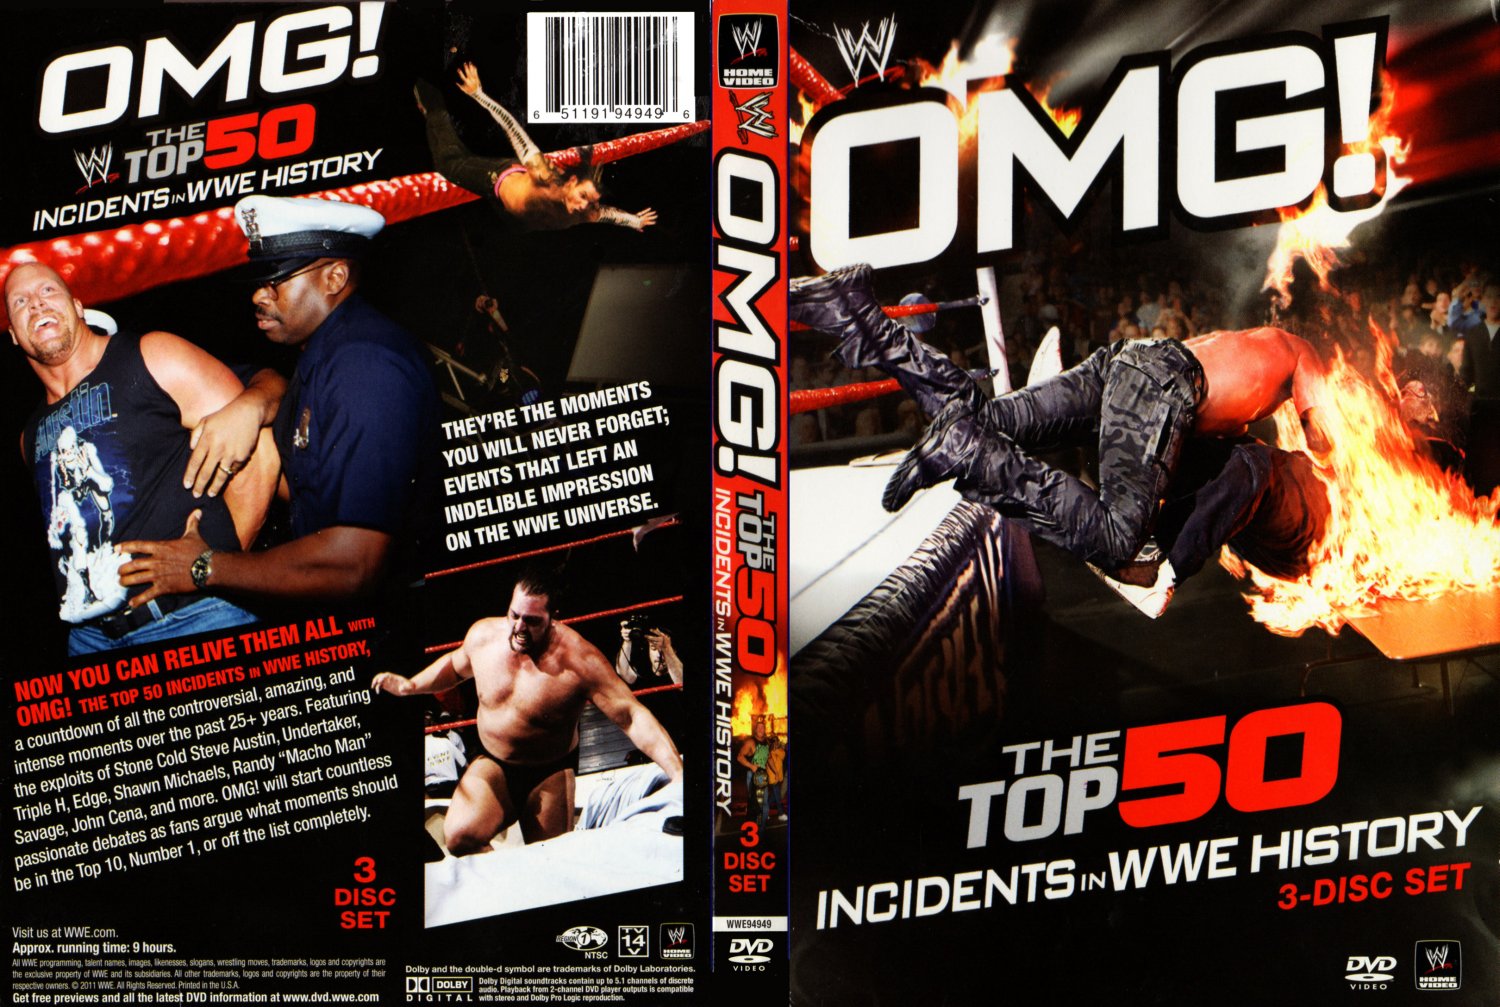 wwe omg the top 50 incidents in wwe history